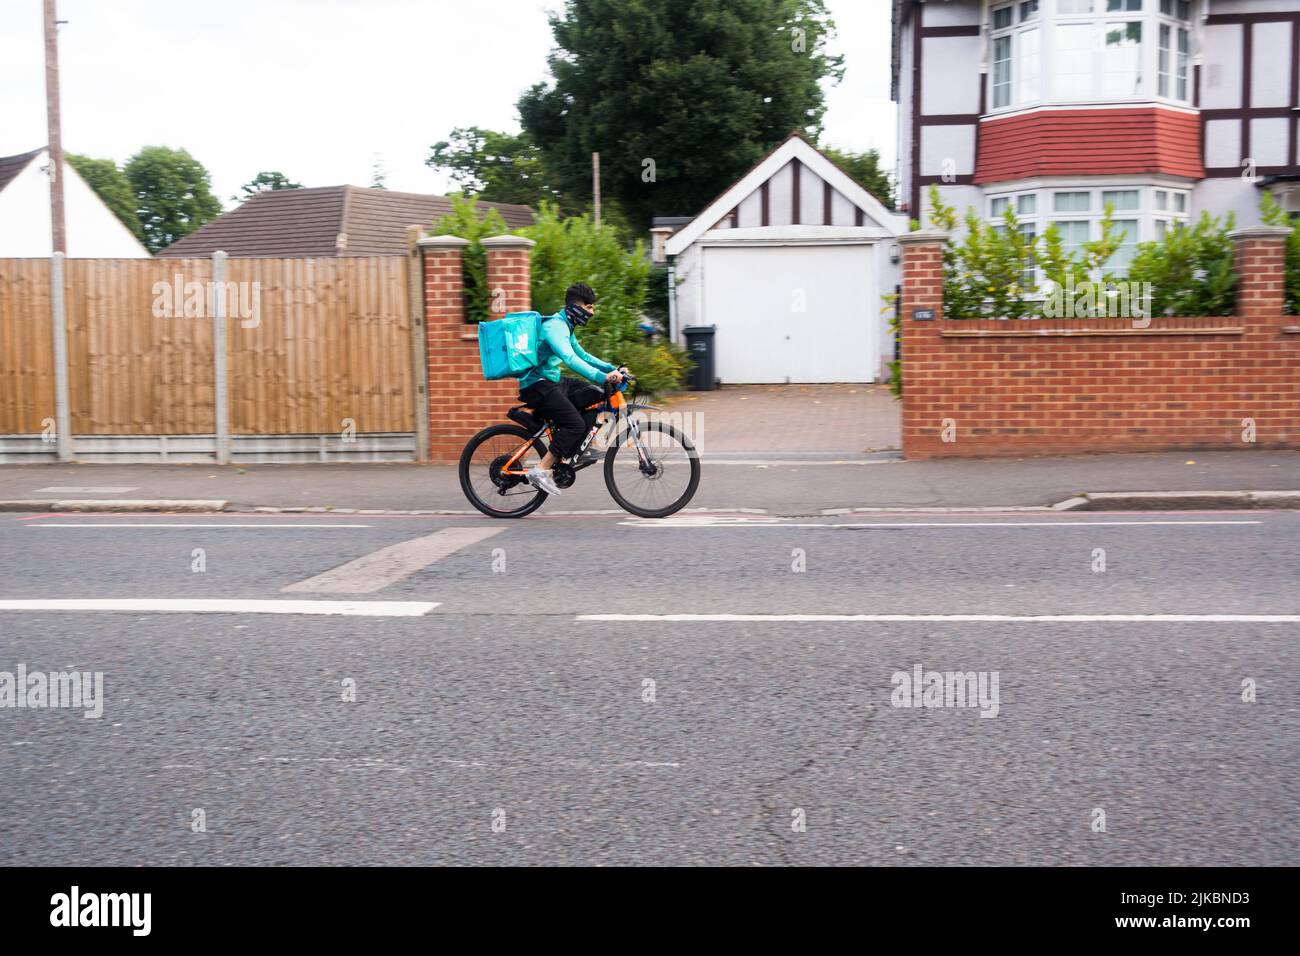 Deliveroo rider with backpack container riding on electric bike Stock Photo